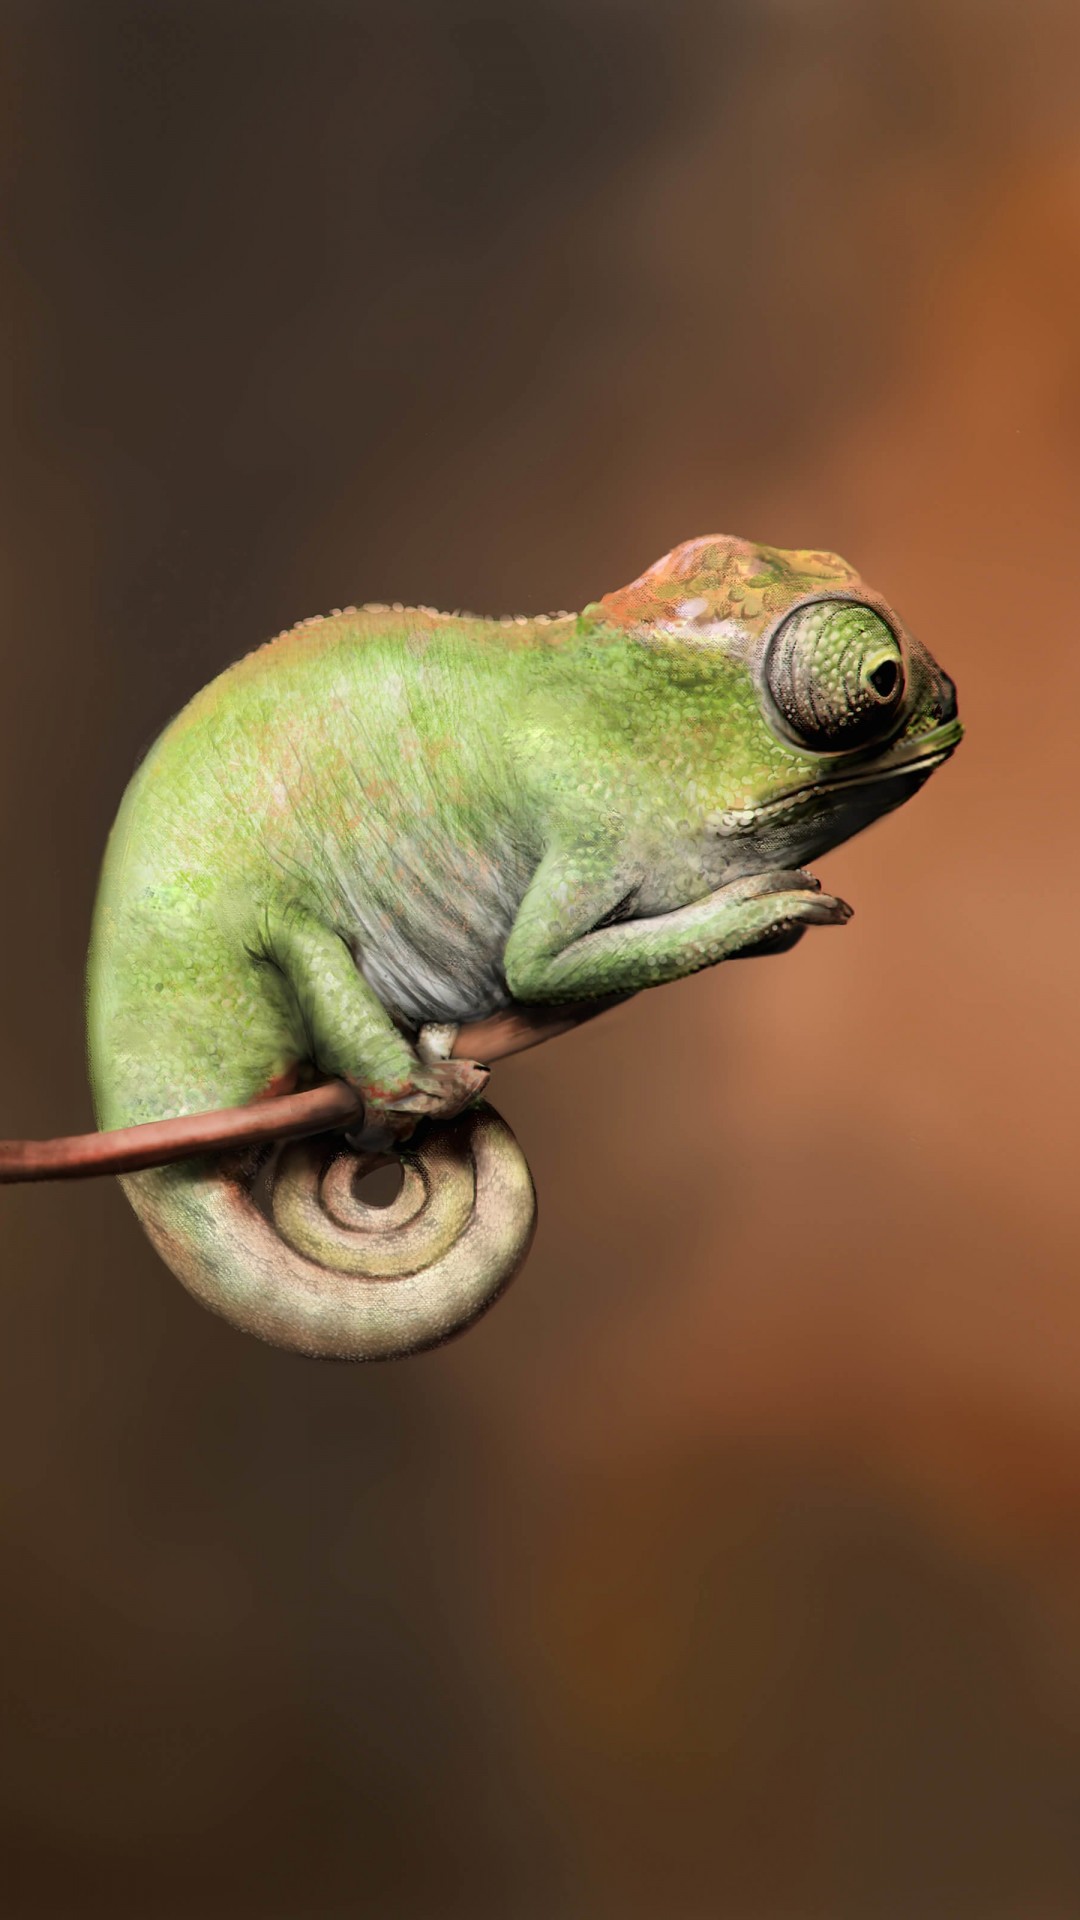 Baby Chameleon Perching On a Twisted Branch Wallpaper for LG G2